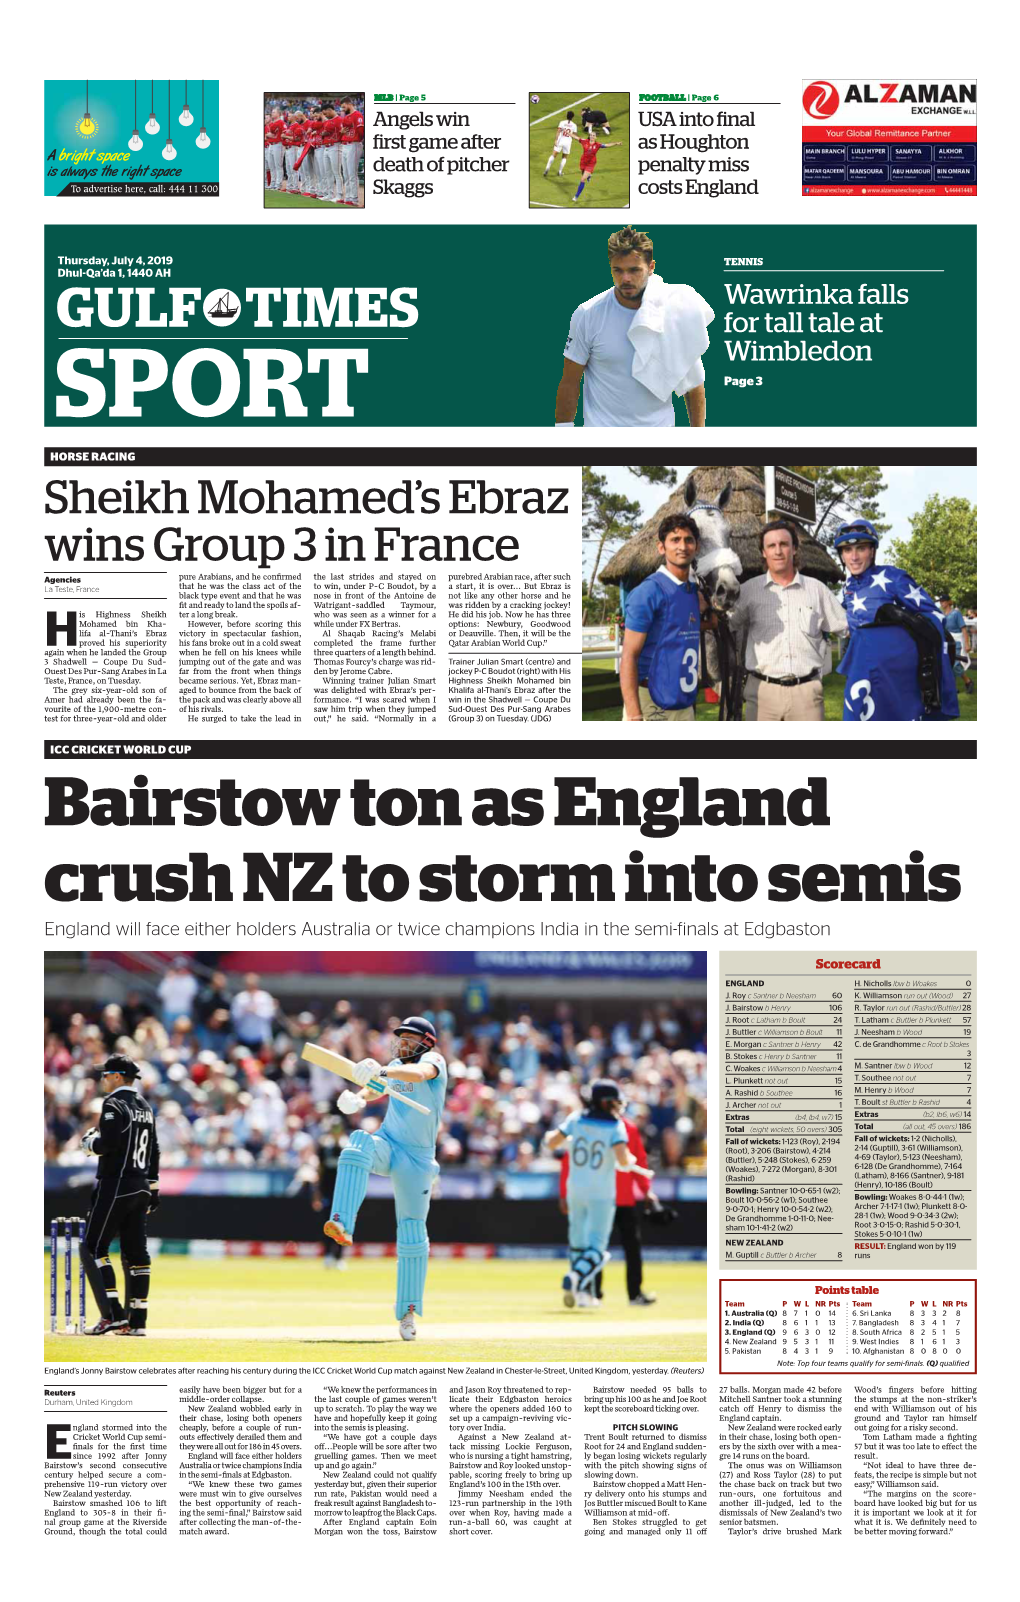 Bairstow Ton As England Crush NZ to Storm Into Semis England Will Face Either Holders Australia Or Twice Champions India in the Semi-Finals at Edgbaston